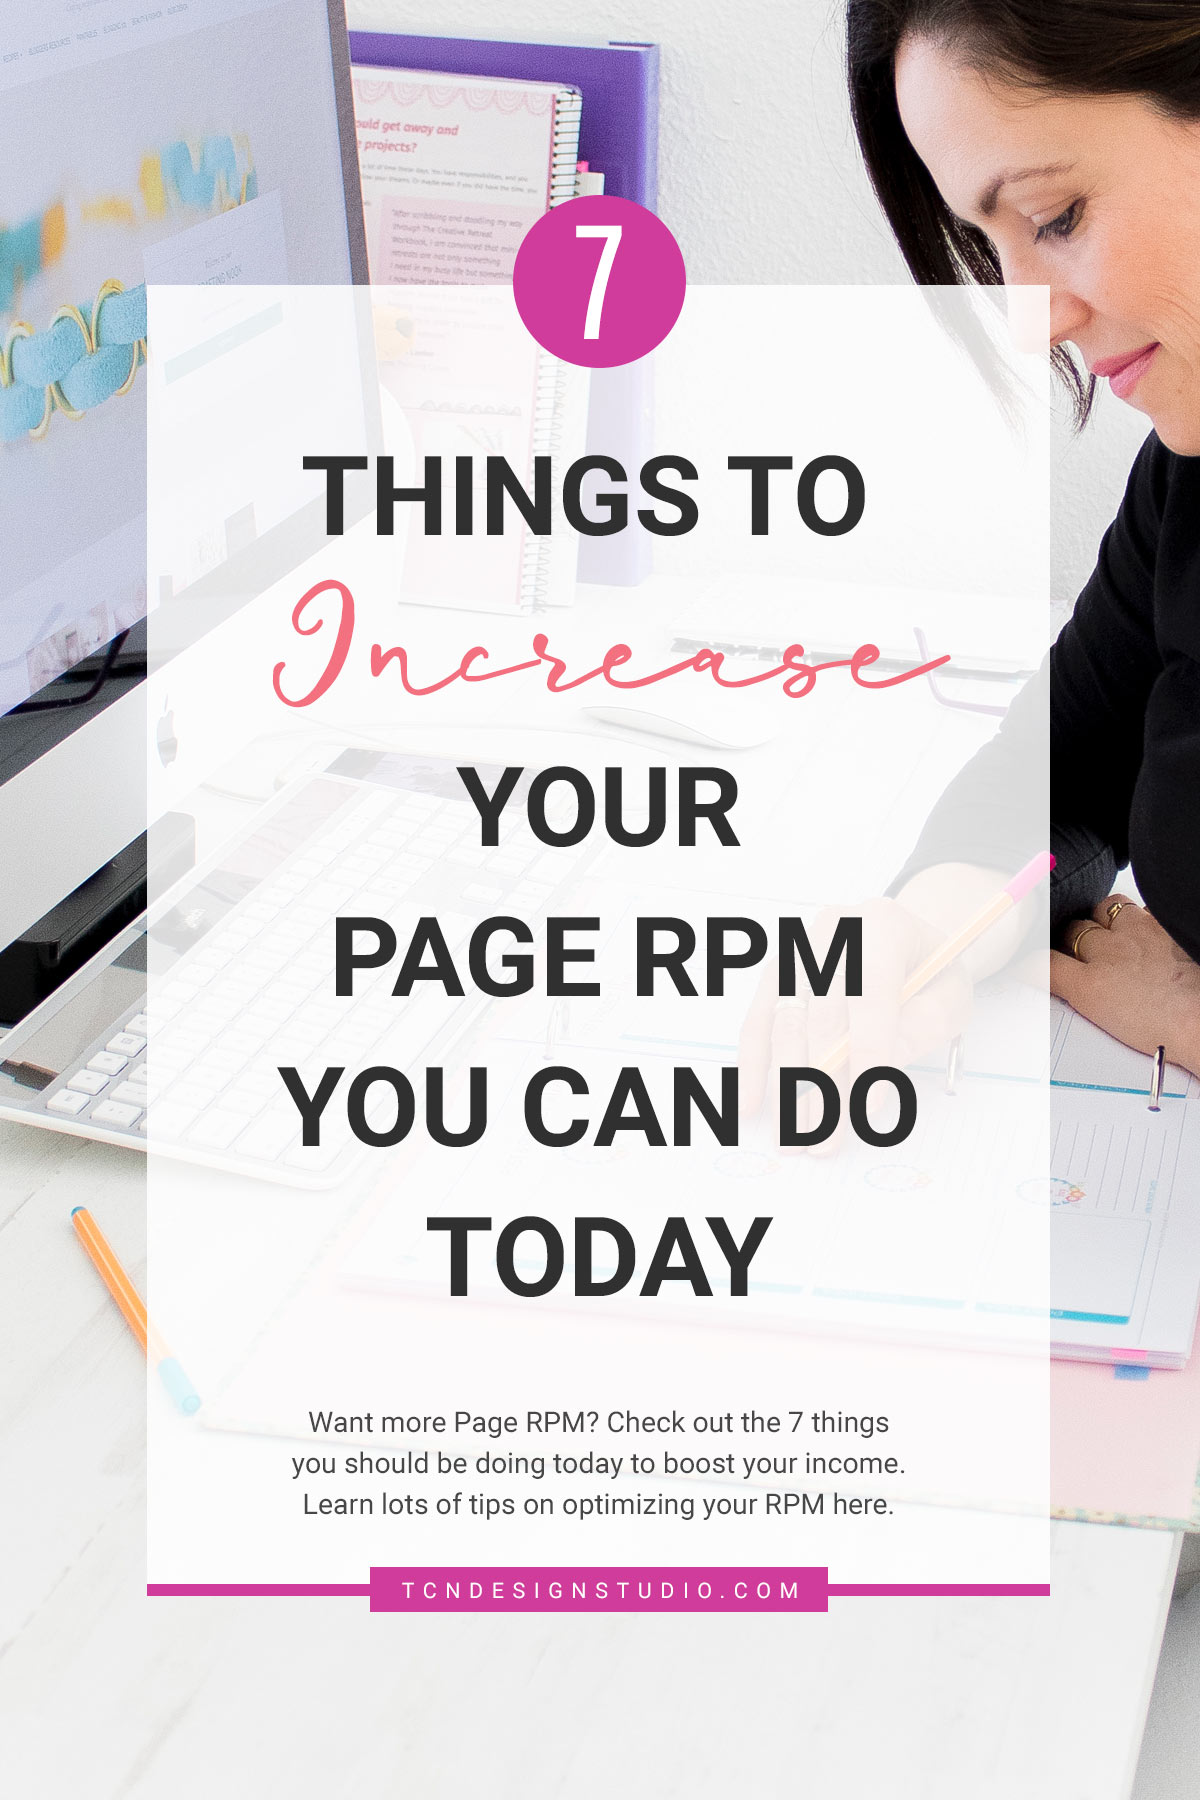 7 Things to increase your Page RPM You can do today Cover image with title overlay over photo and white faded color cackground